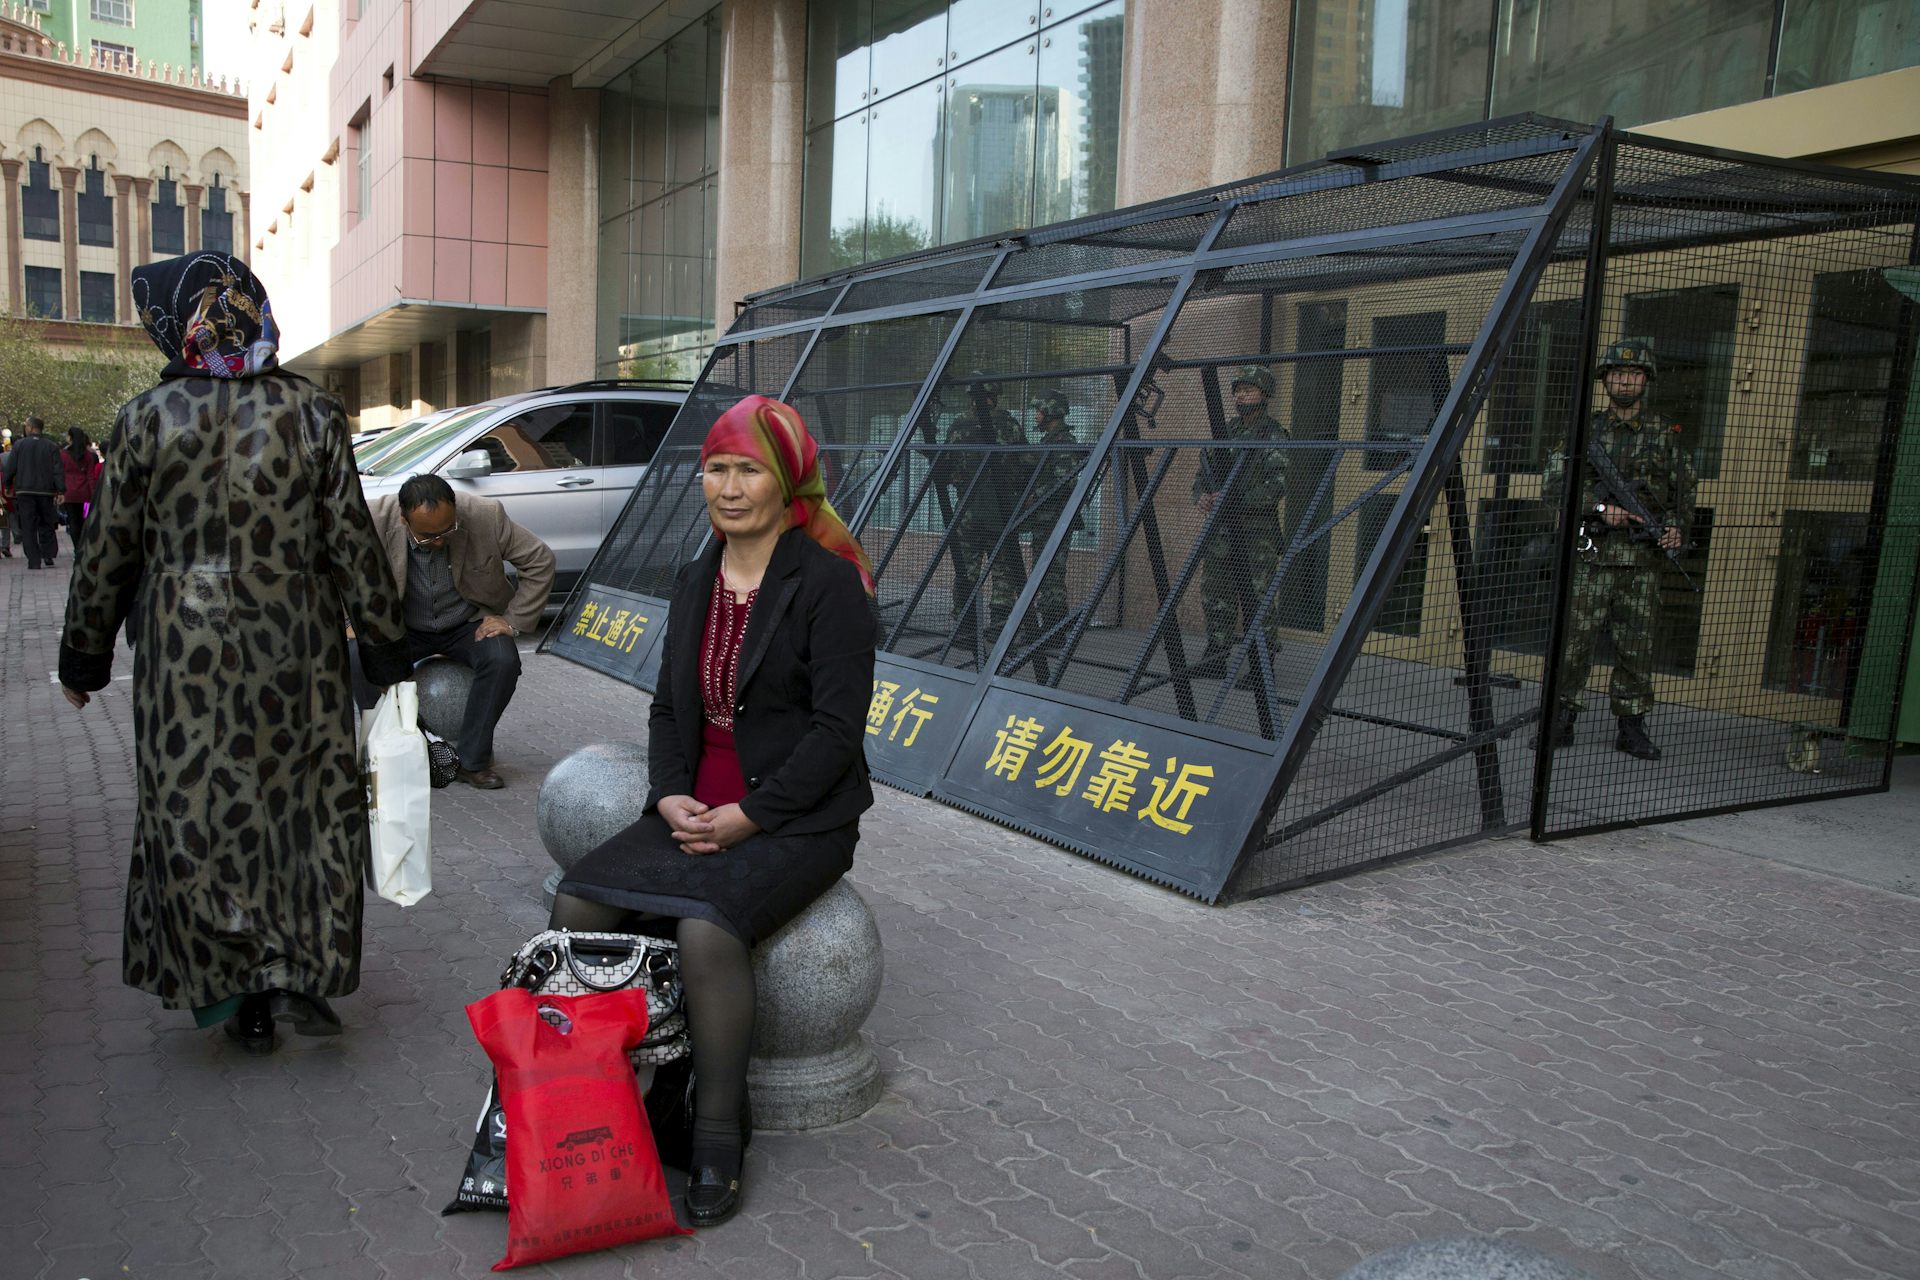 I Was in China Doing Research When I Saw My Uighur Friends Disappear